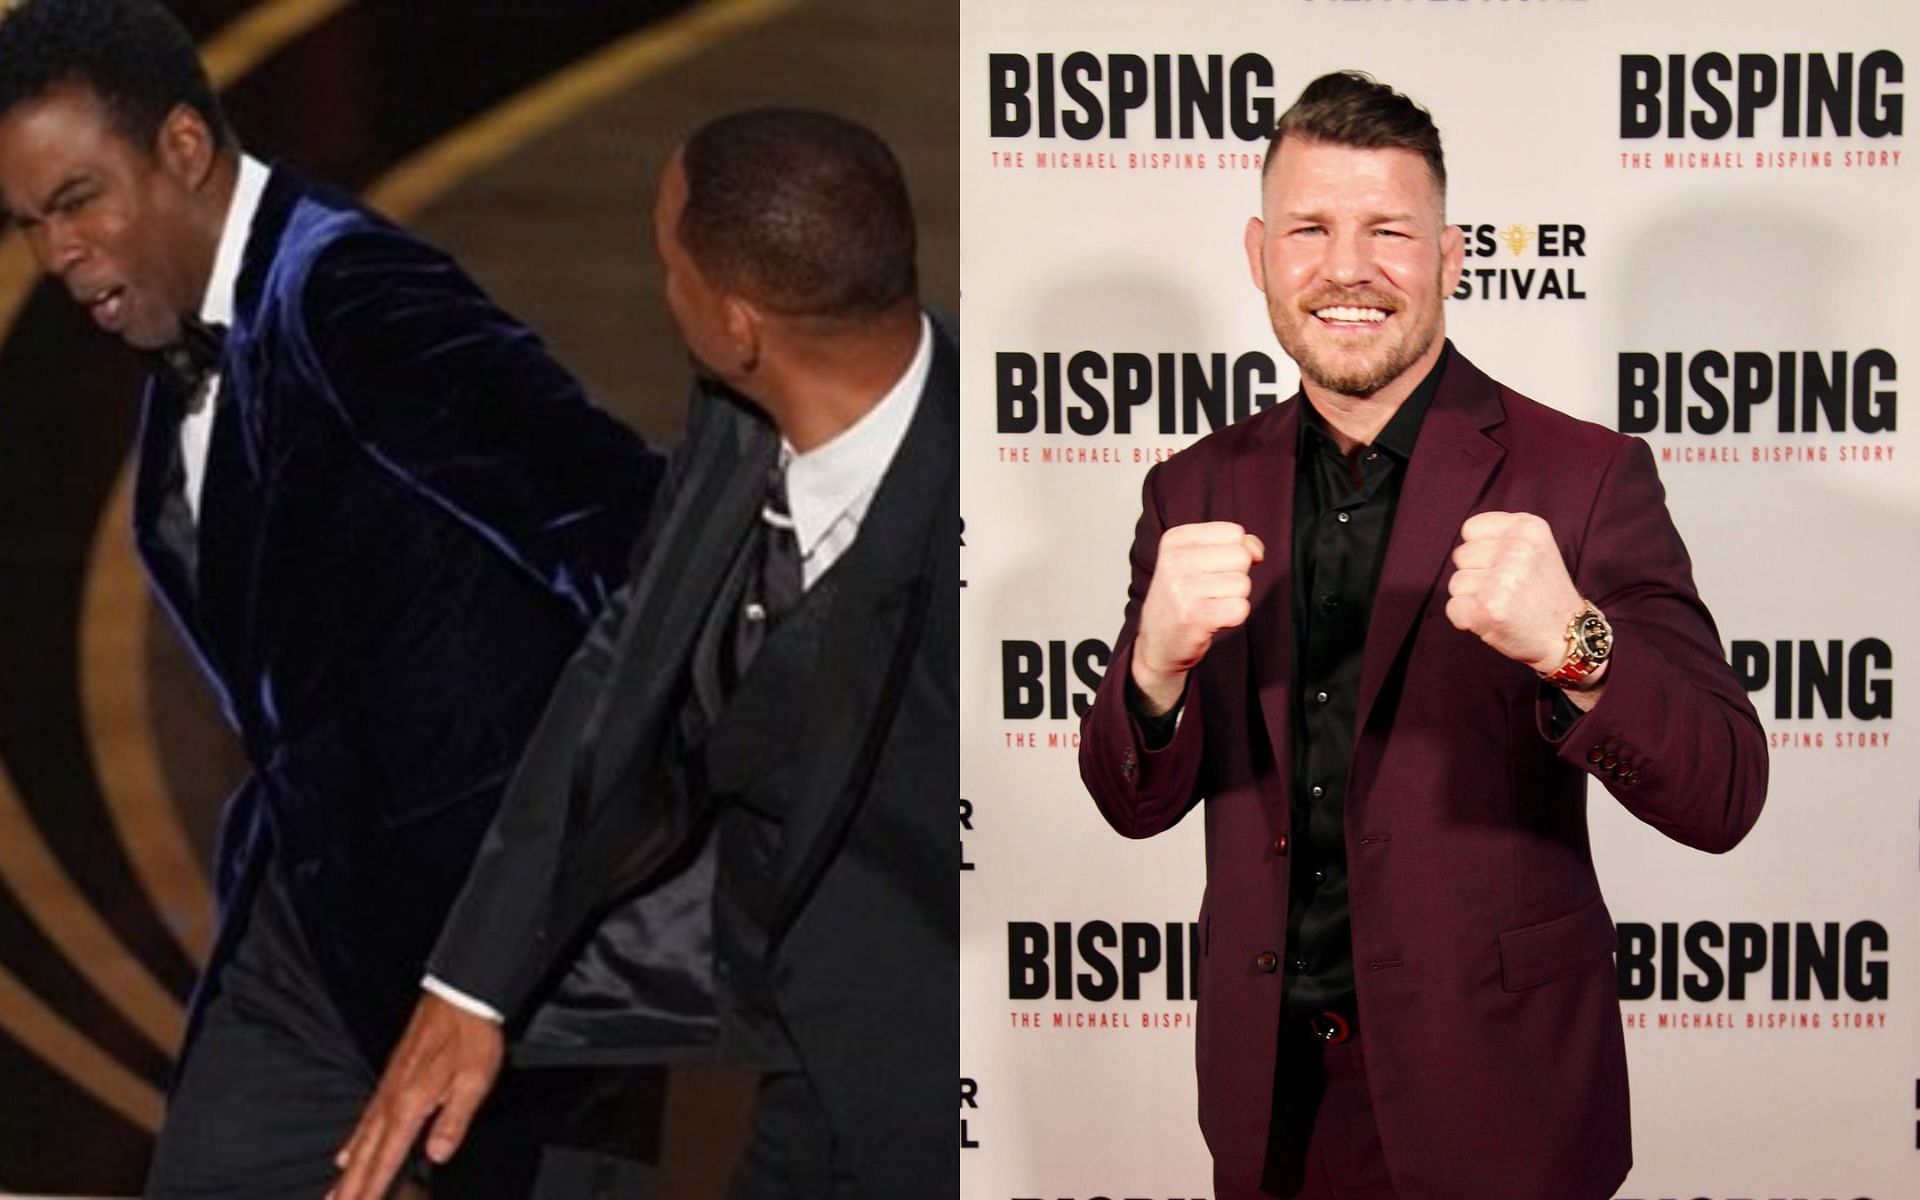 Will Smith slaps Chris Rock (left), Michael Bisping (right) [Images via @RapTV on Twitter and @mikebisping on Instagram]